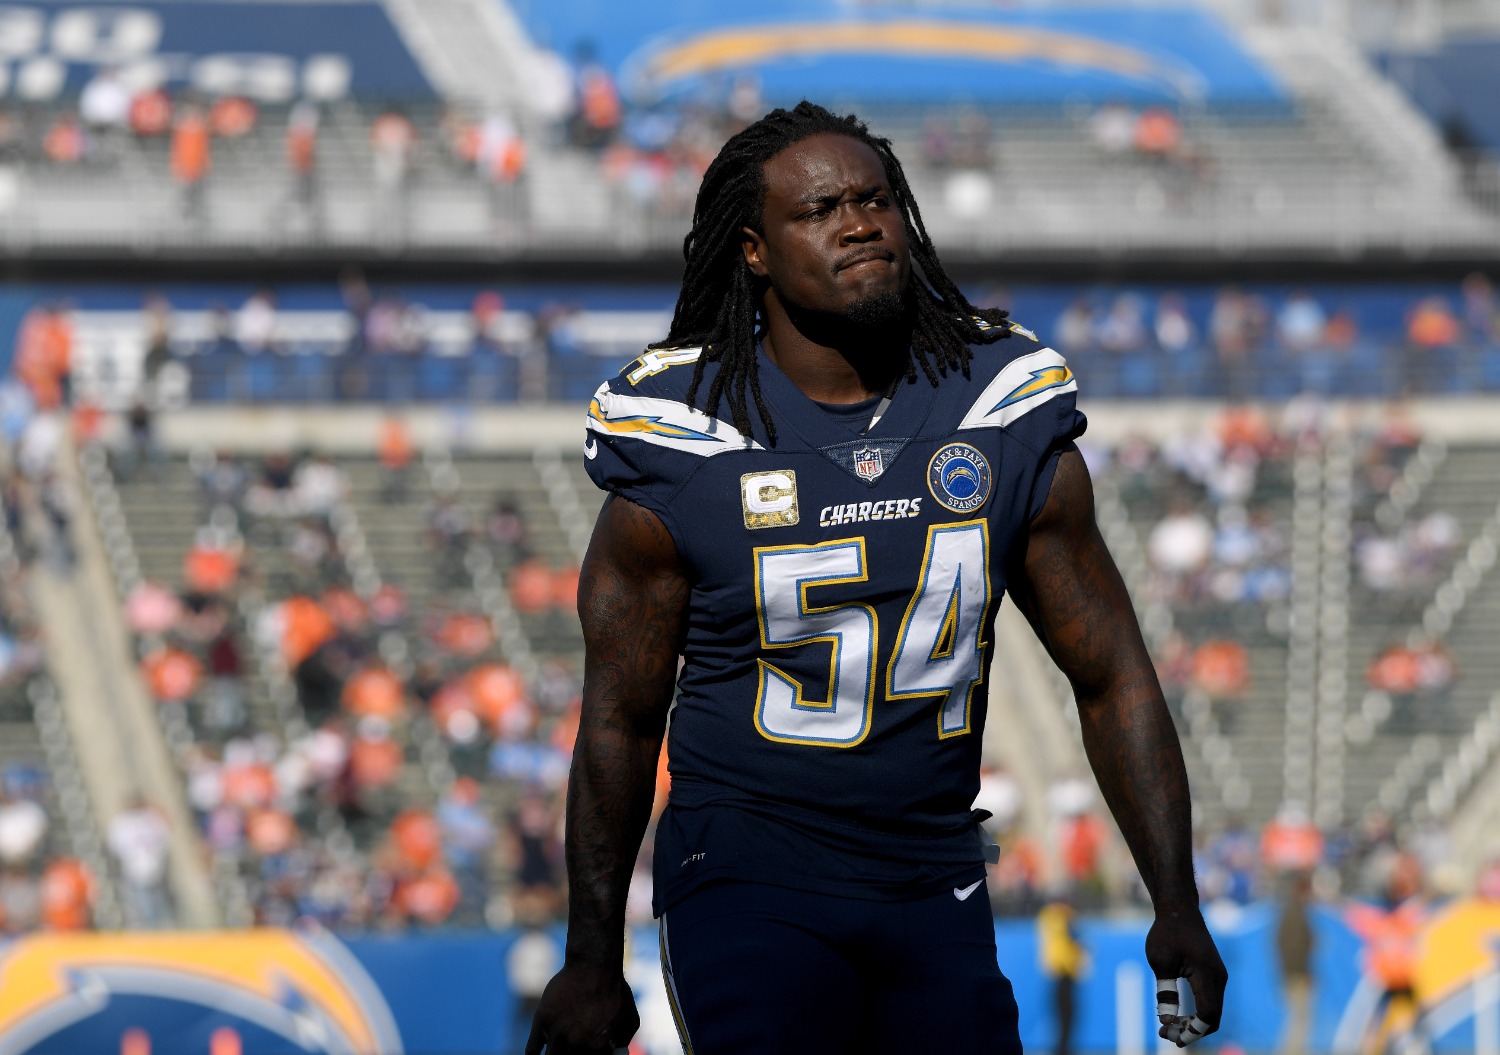 The Los Angeles Chargers will be without Melvin Ingram for at least a few weeks due to a knee injury.